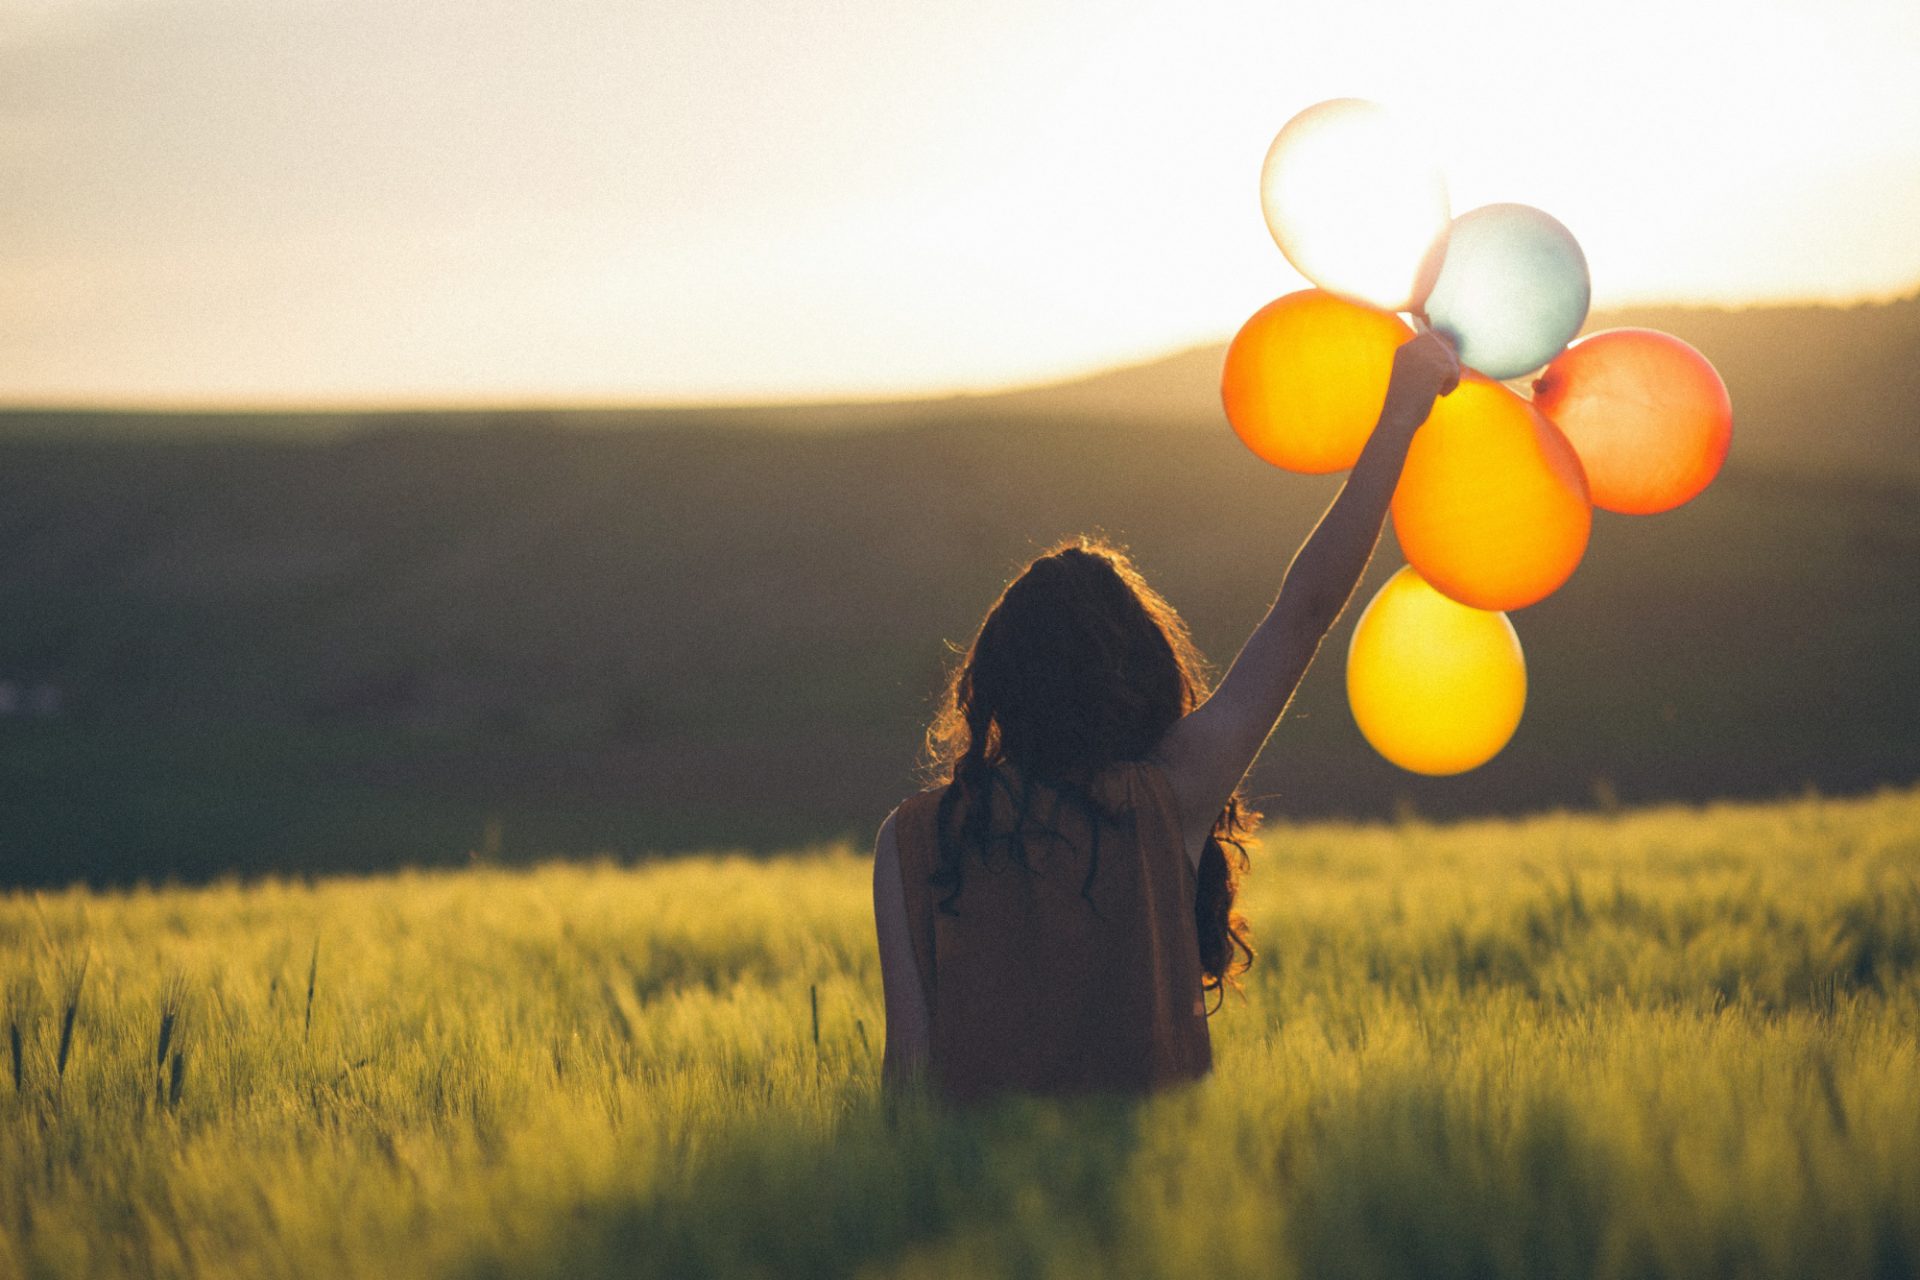 Woman standing in a field holding yellow balloons.